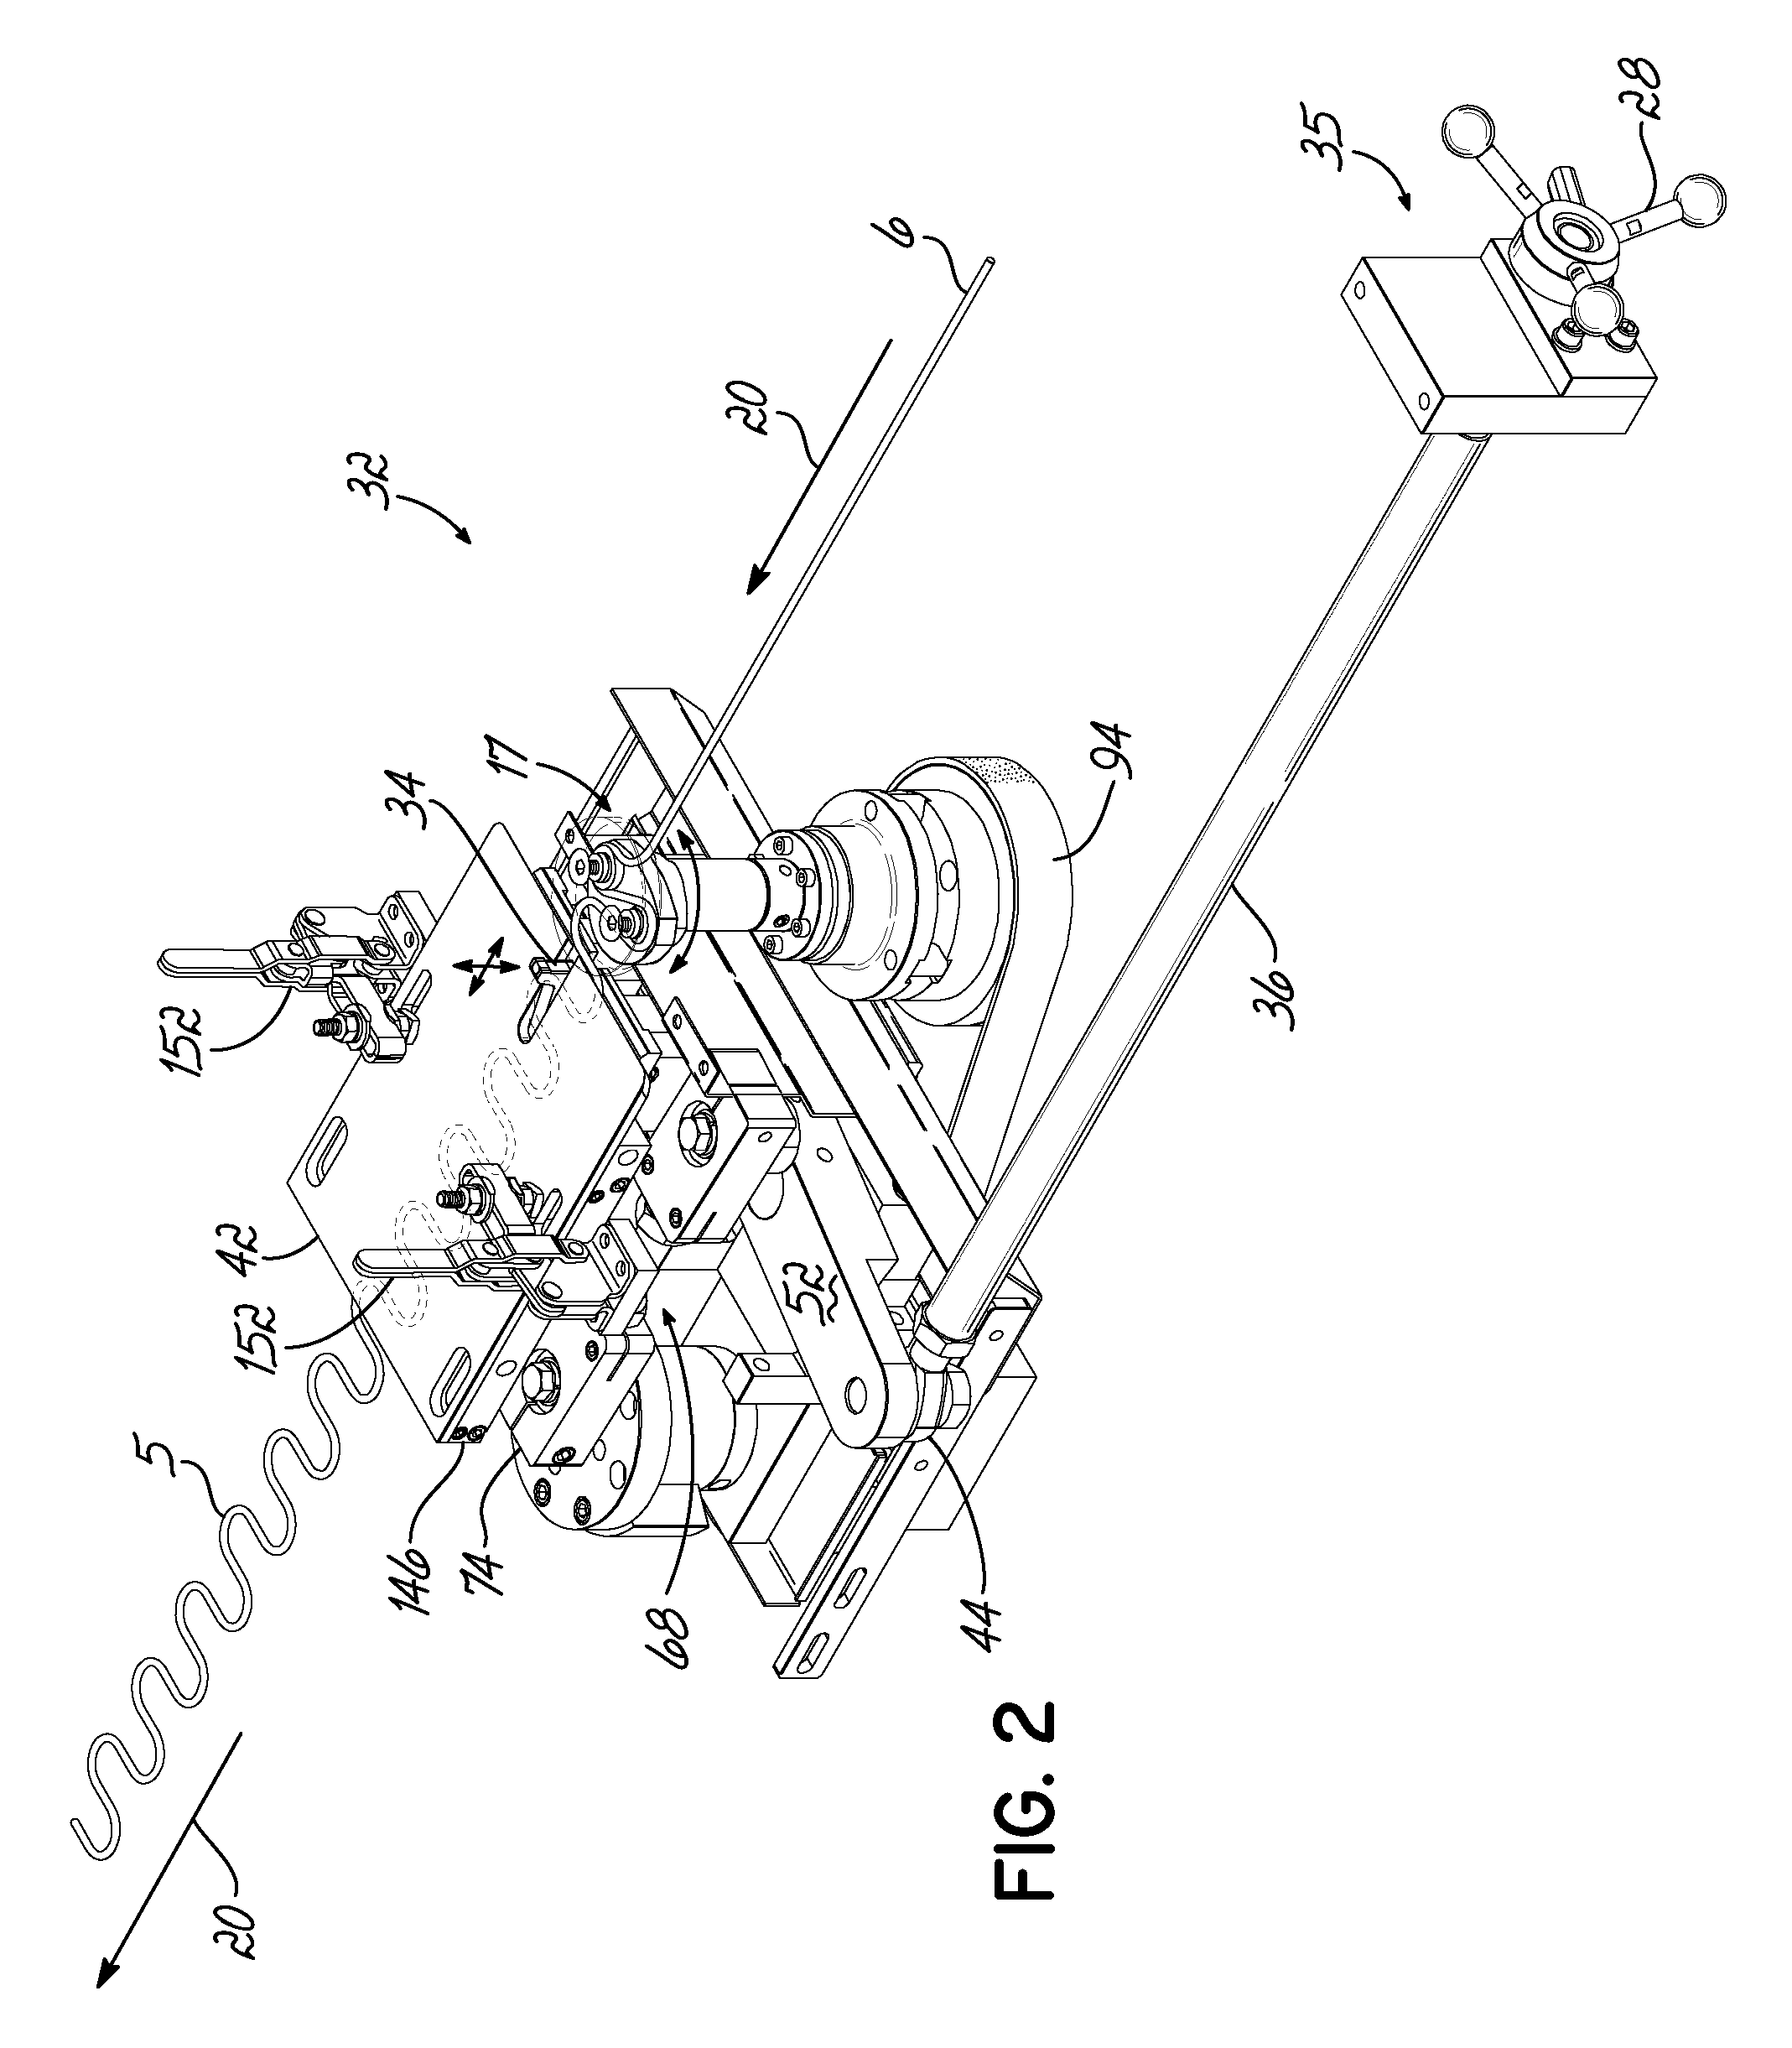 Method and Apparatus For Automating Production of Sinuous Springs